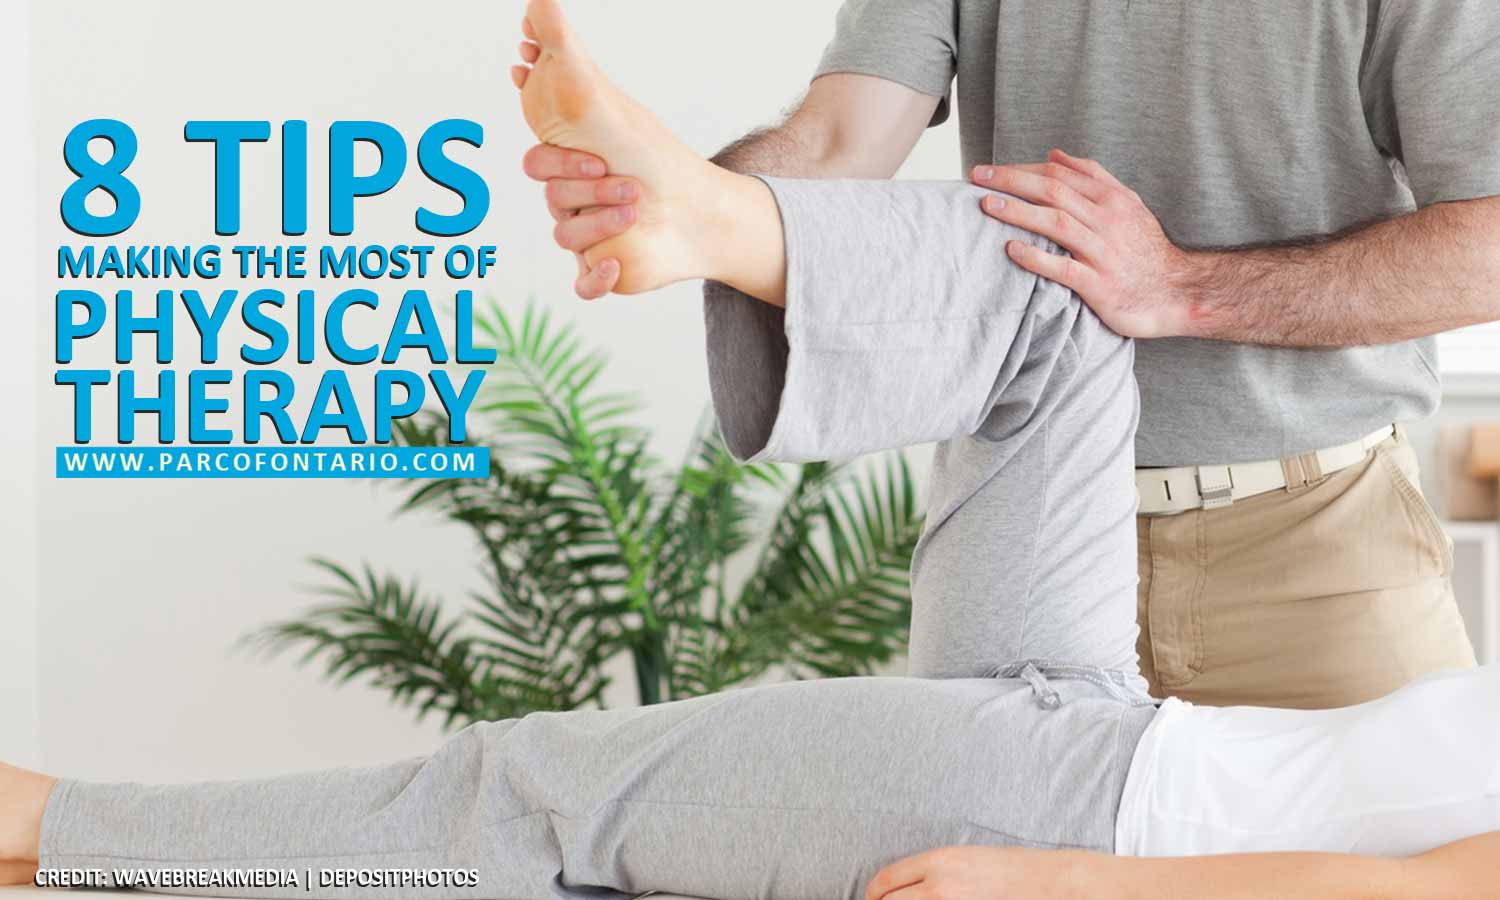 8-Tips-for-Making-the-Most-of-Physical-Therapy